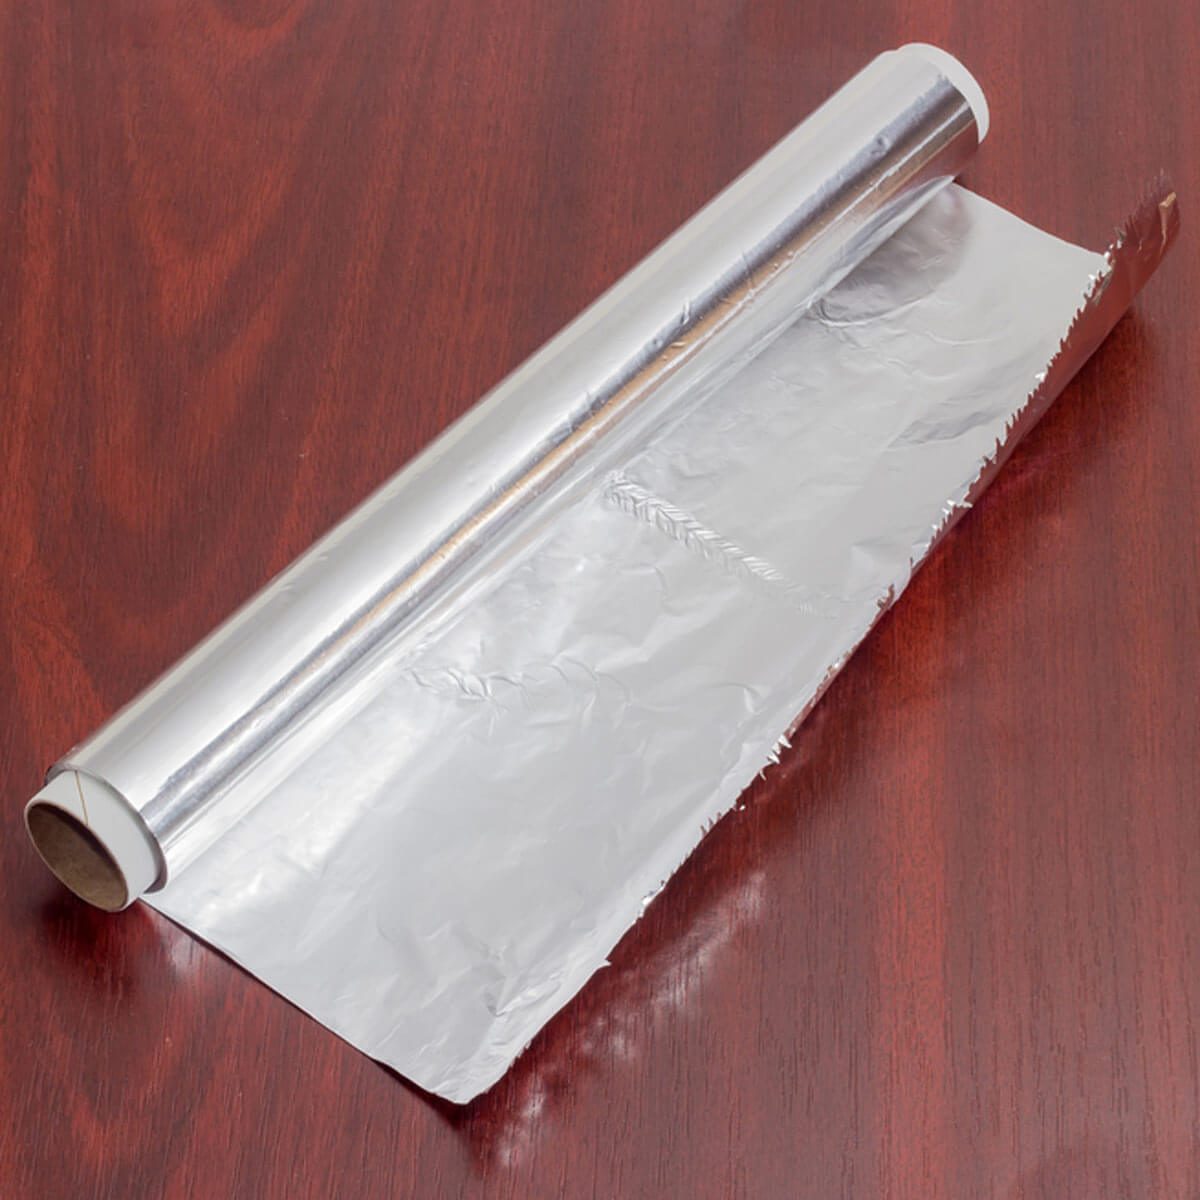 12 Brilliant Uses For Aluminum Foil Around The House